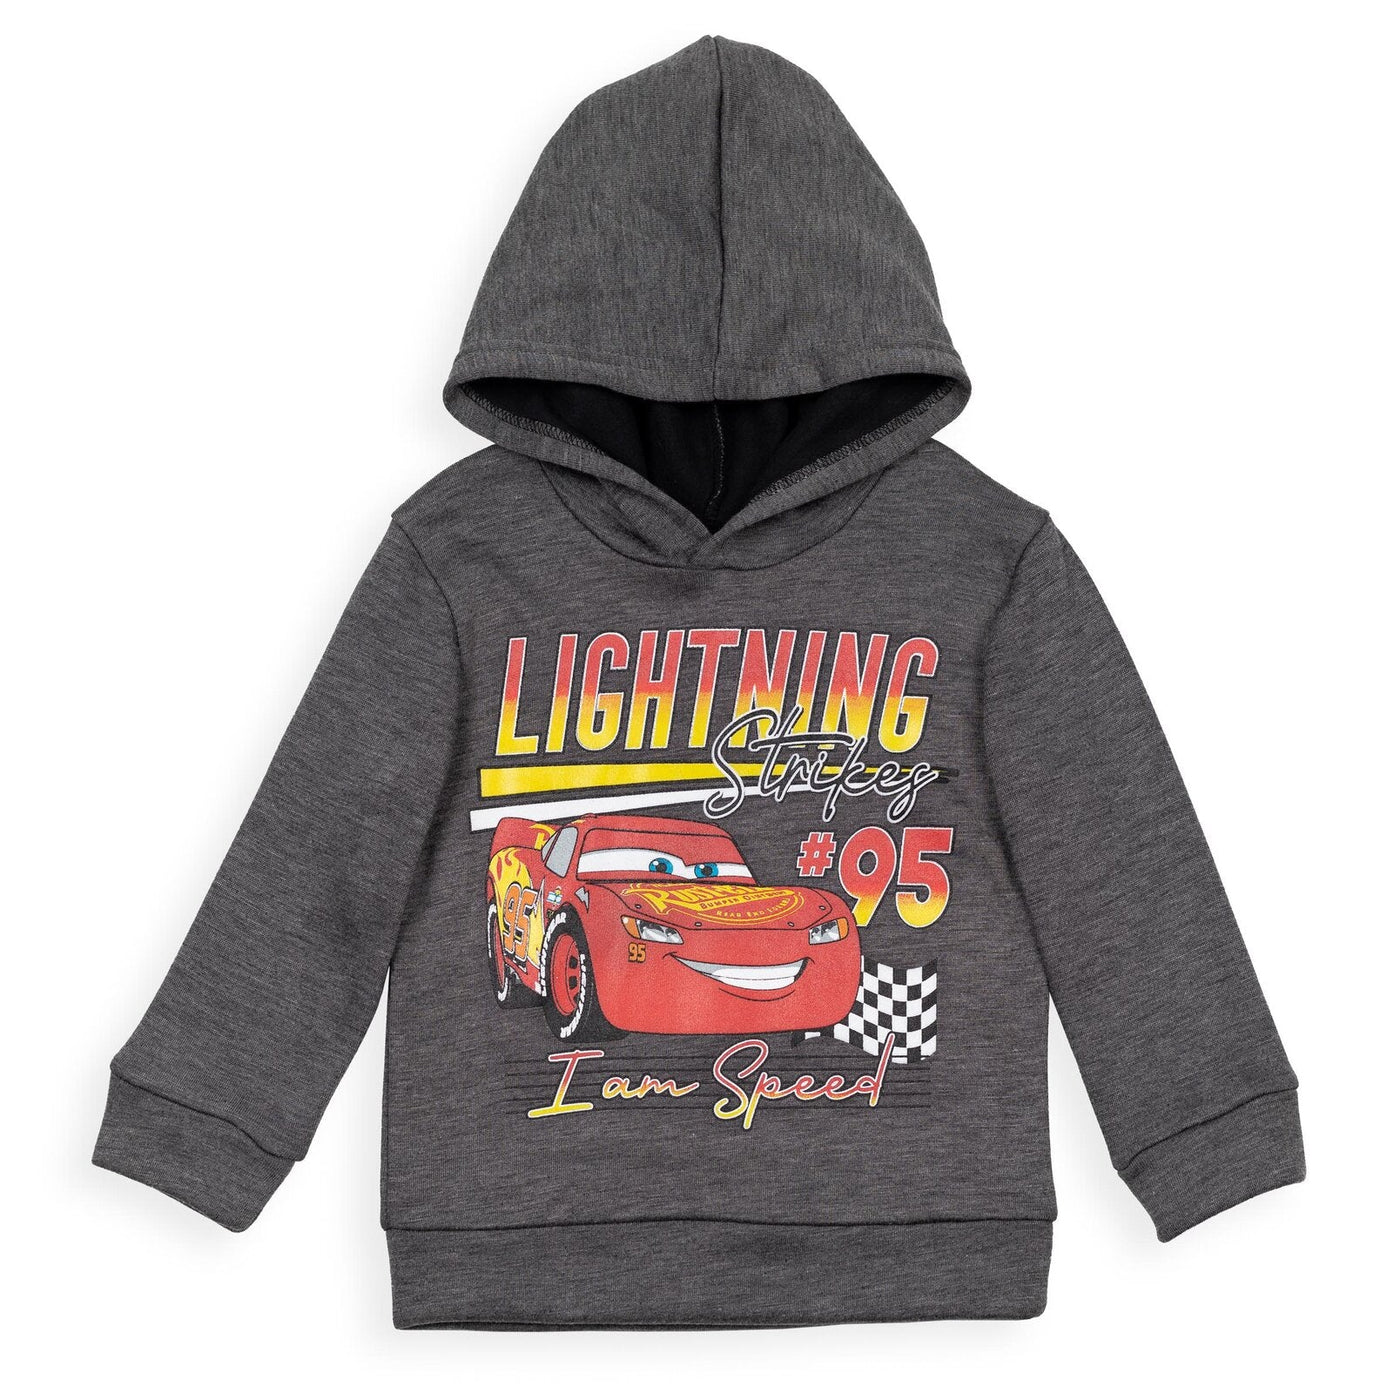 Disney Cars Lightning McQueen Fleece Pullover Hoodie and Pants Outfit Set - imagikids